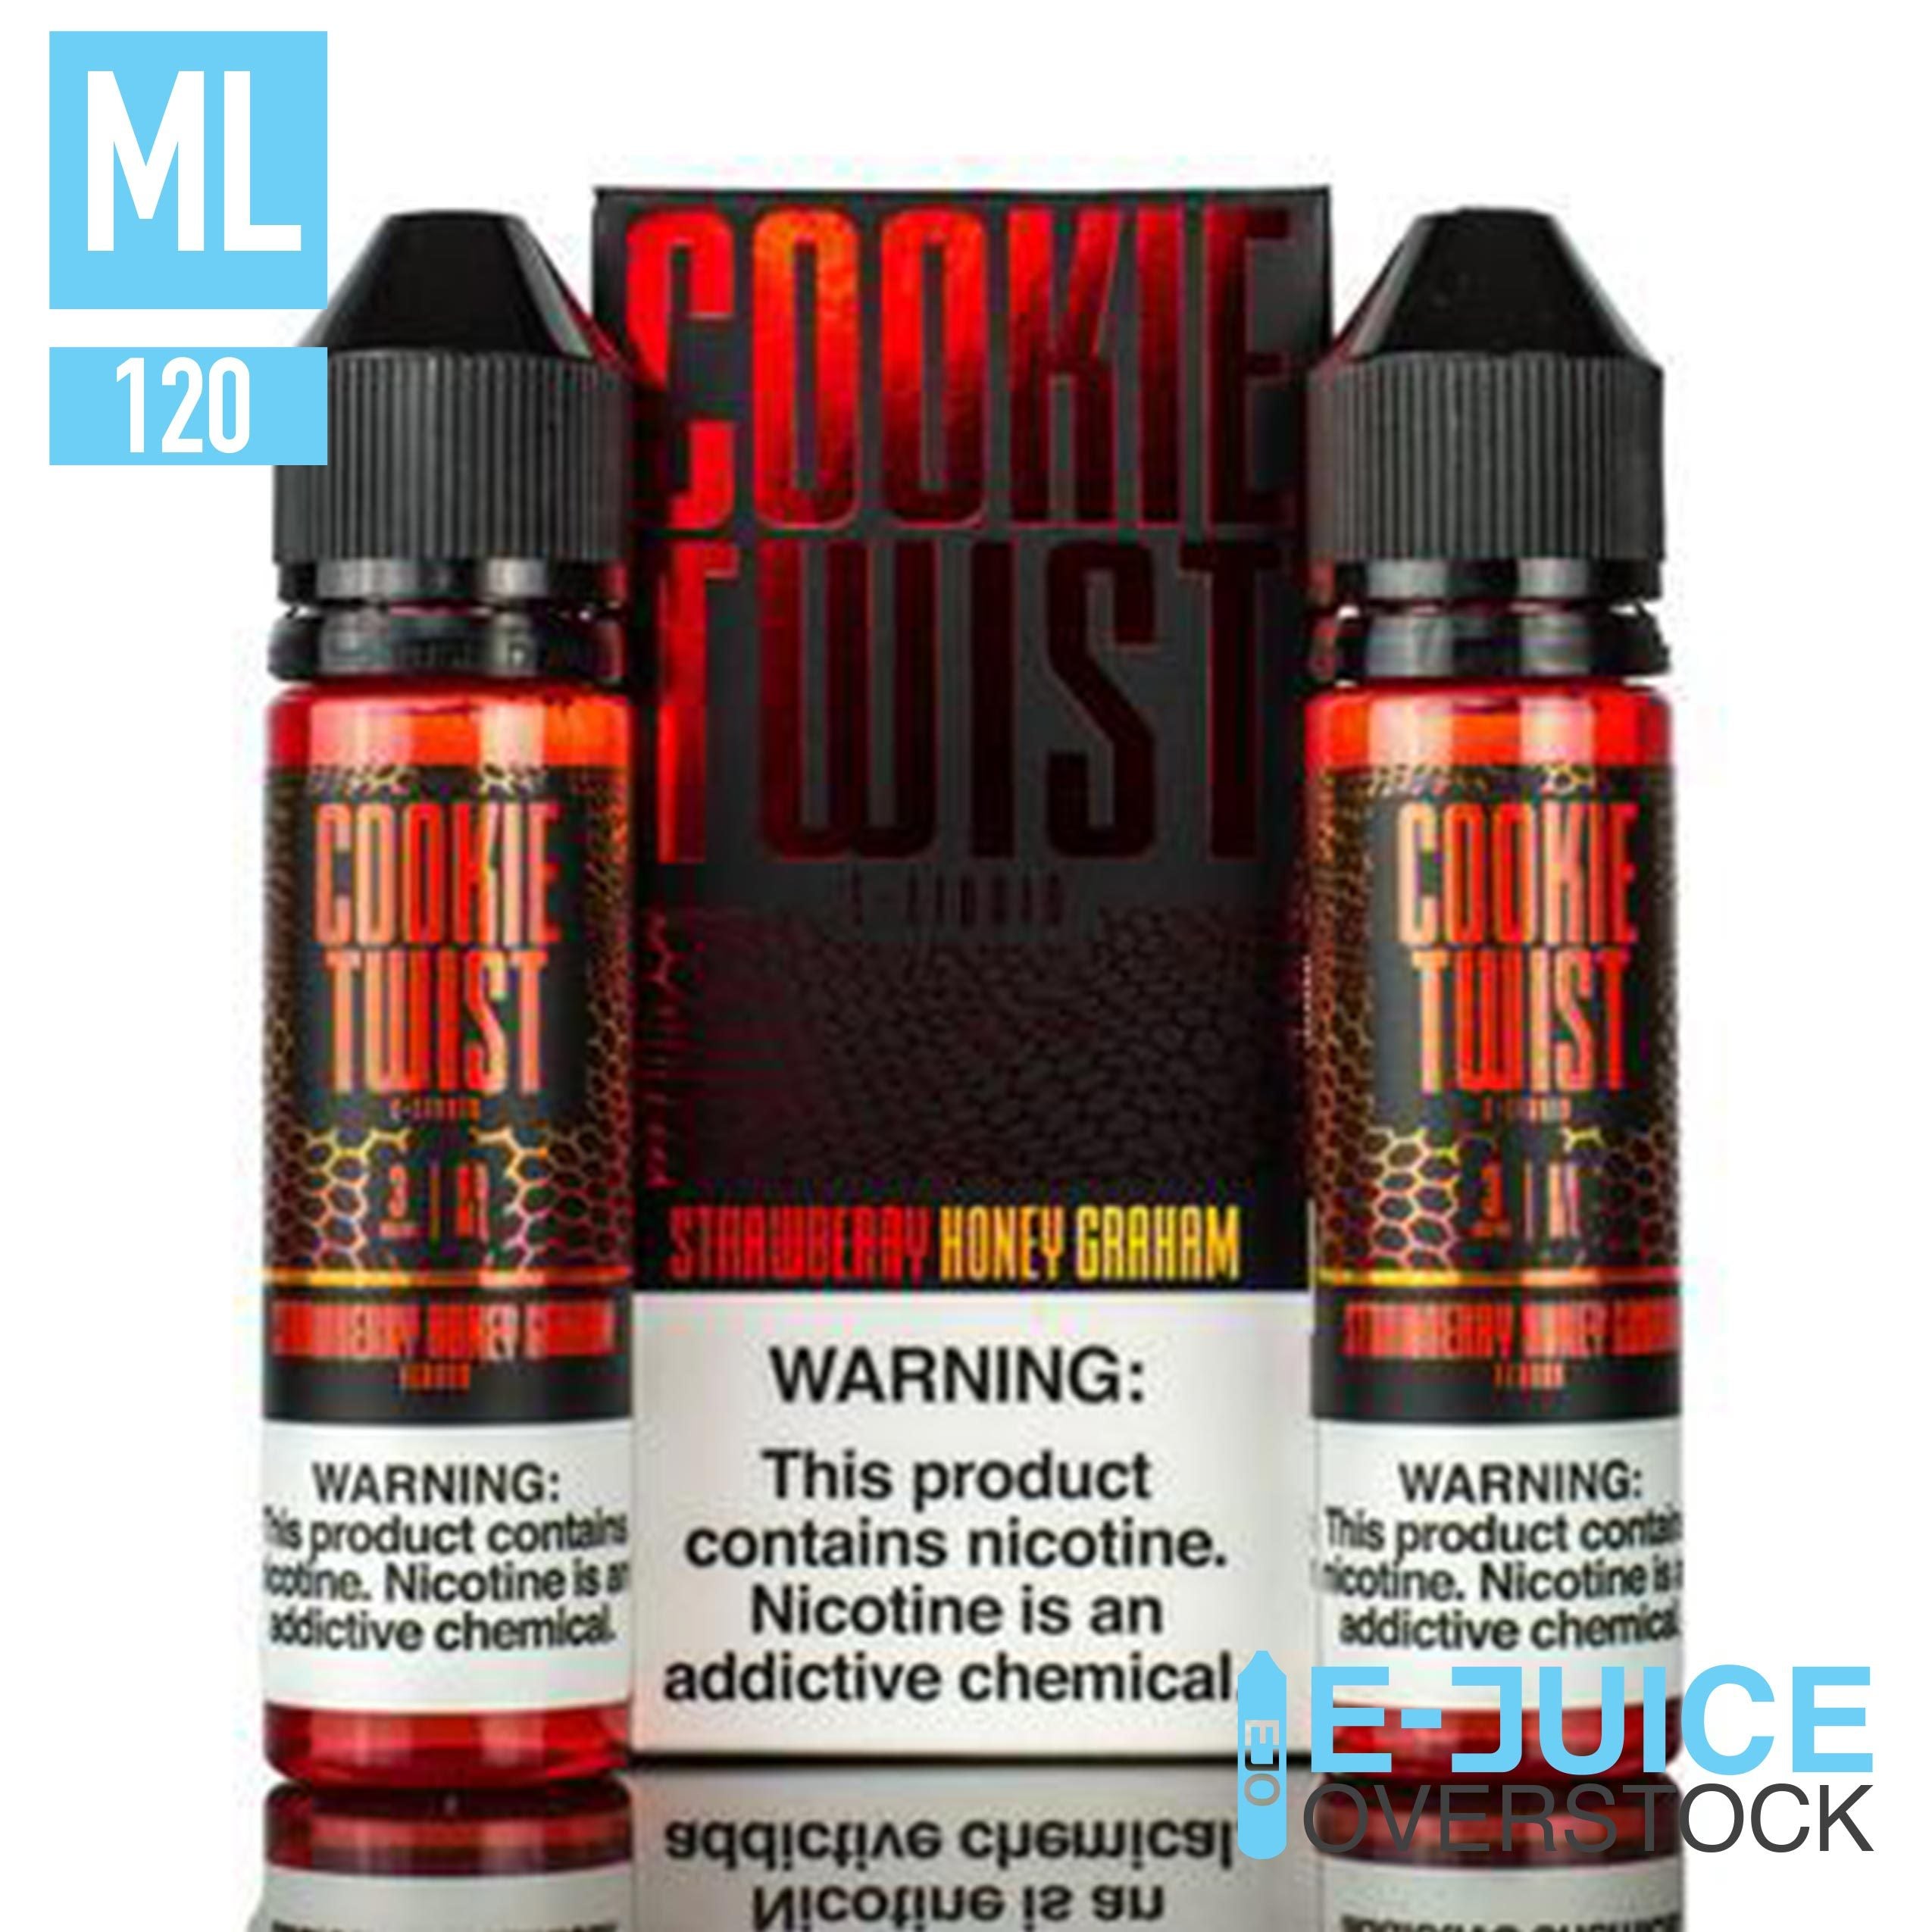 BERRY AMBER (Strawberry Honey Graham) by Cookie Twist 2x60ML EJUICE - EJUICEOVERSTOCK.COM